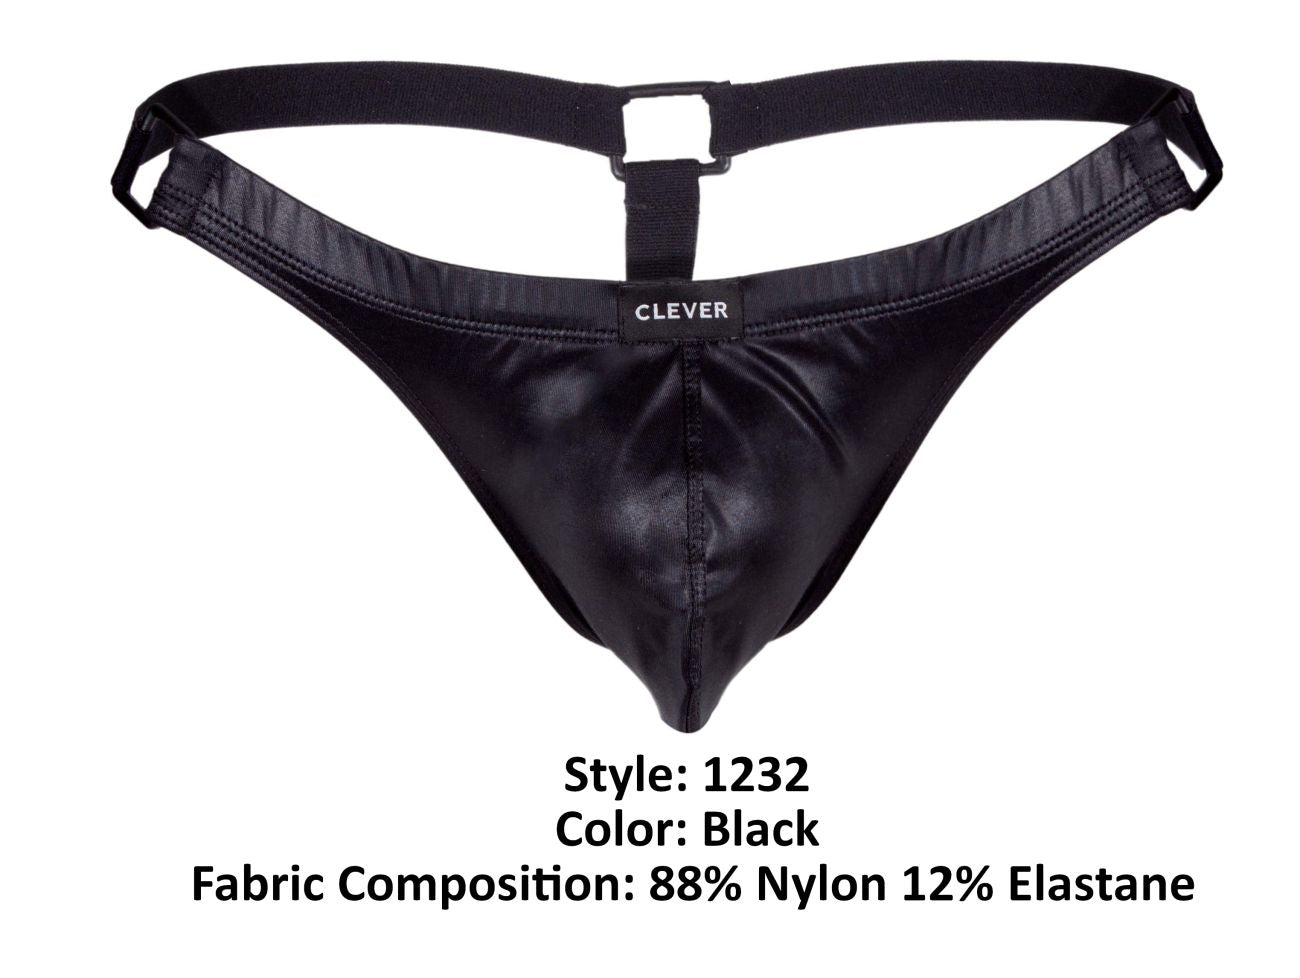 Clever 1232 Karma G-String with side Ring Black